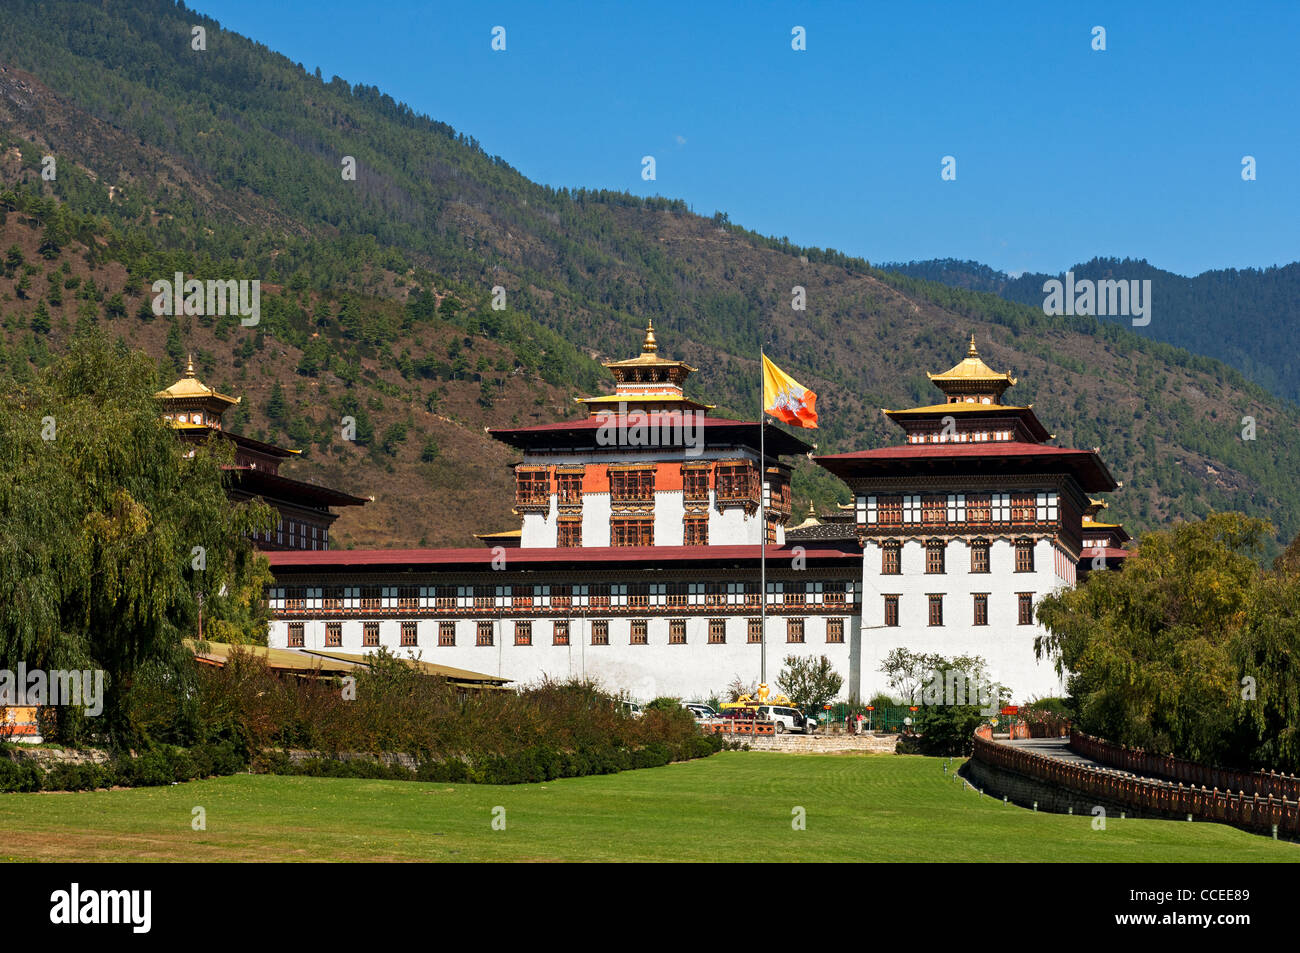 Seat of government Thimphu Dzong or Trashi Chhoe Dzong in the traditional architecural style, Thimphu, Bhutan Stock Photo